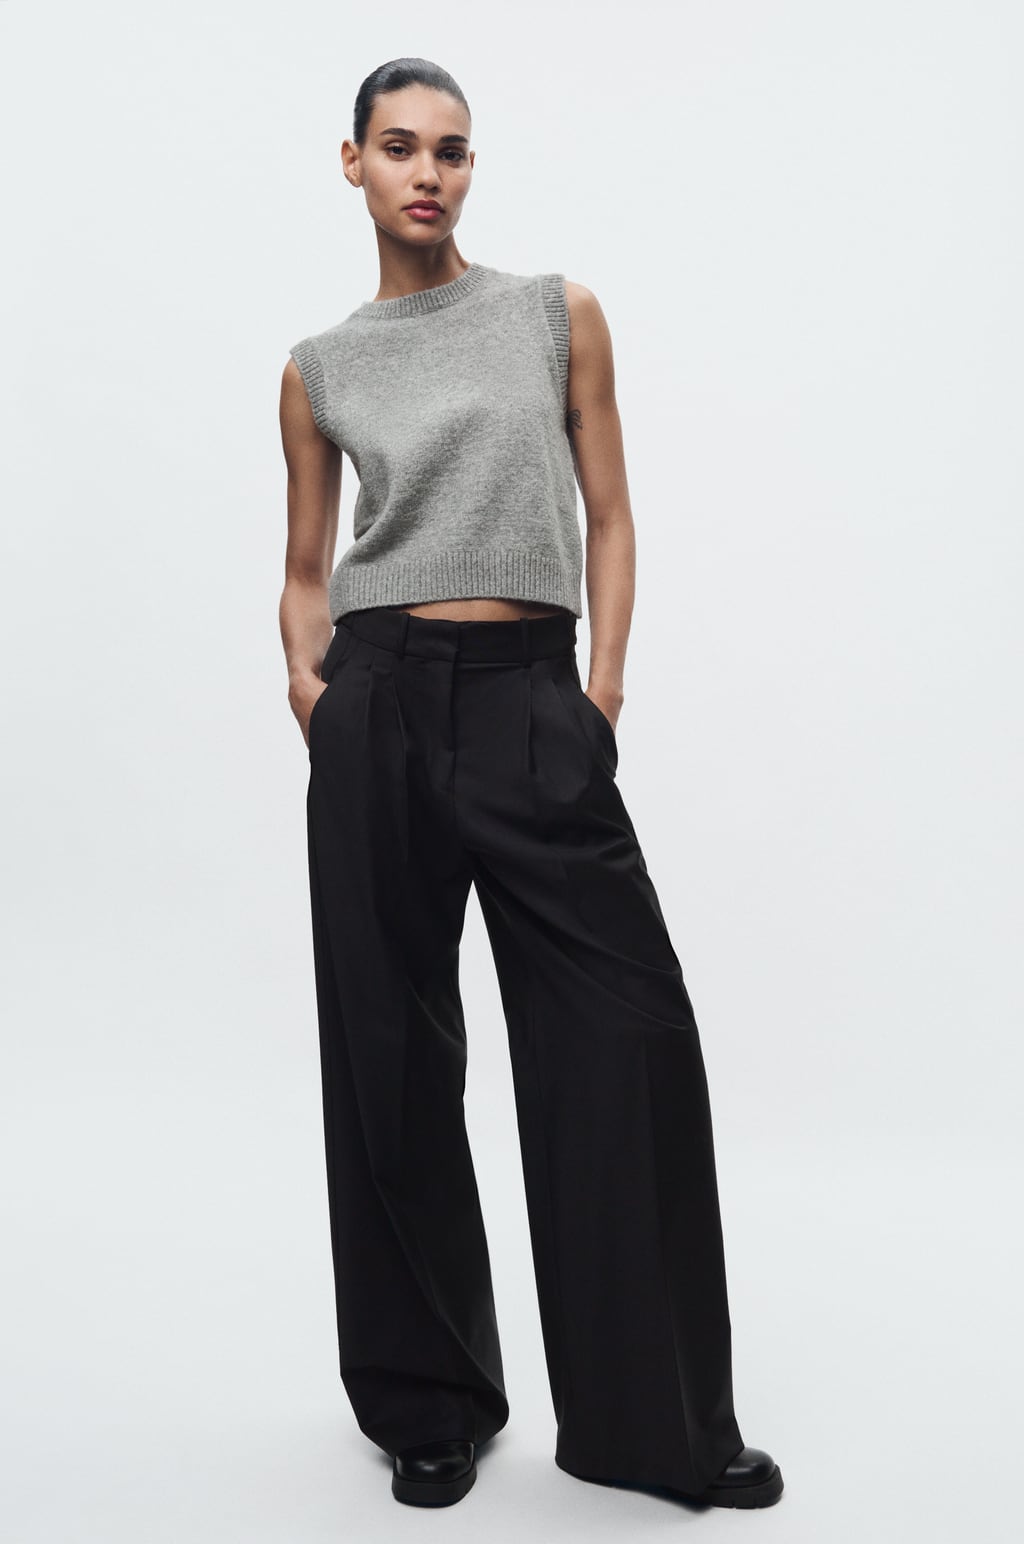 42 Luxe-Looking New Arrivals From Zara, J.Crew, and Mango | Who What Wear